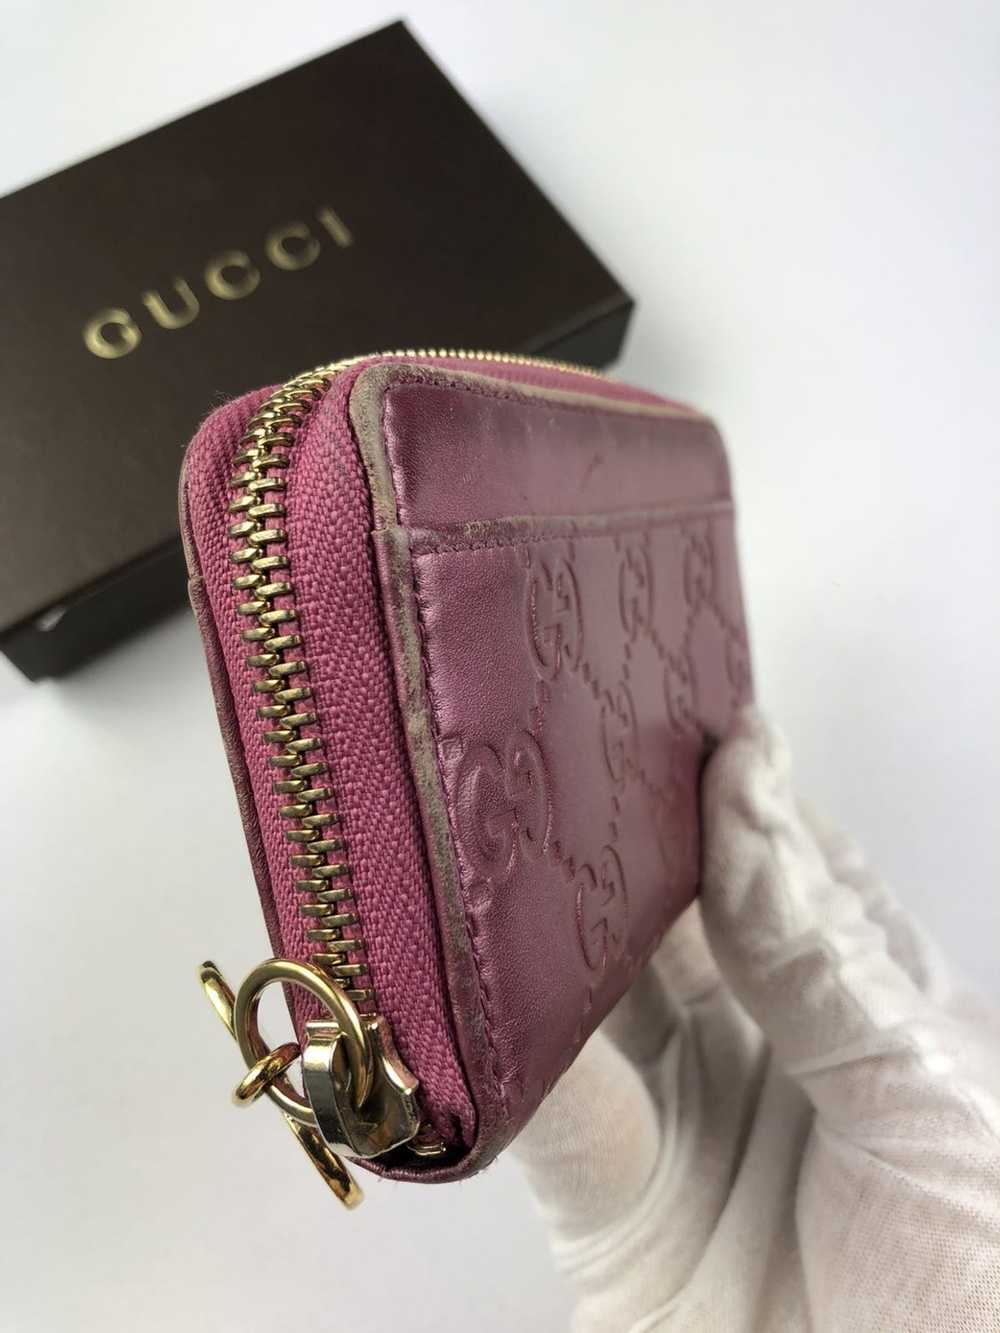 Gucci Gucci gg guccissima leather cles wallet - image 3